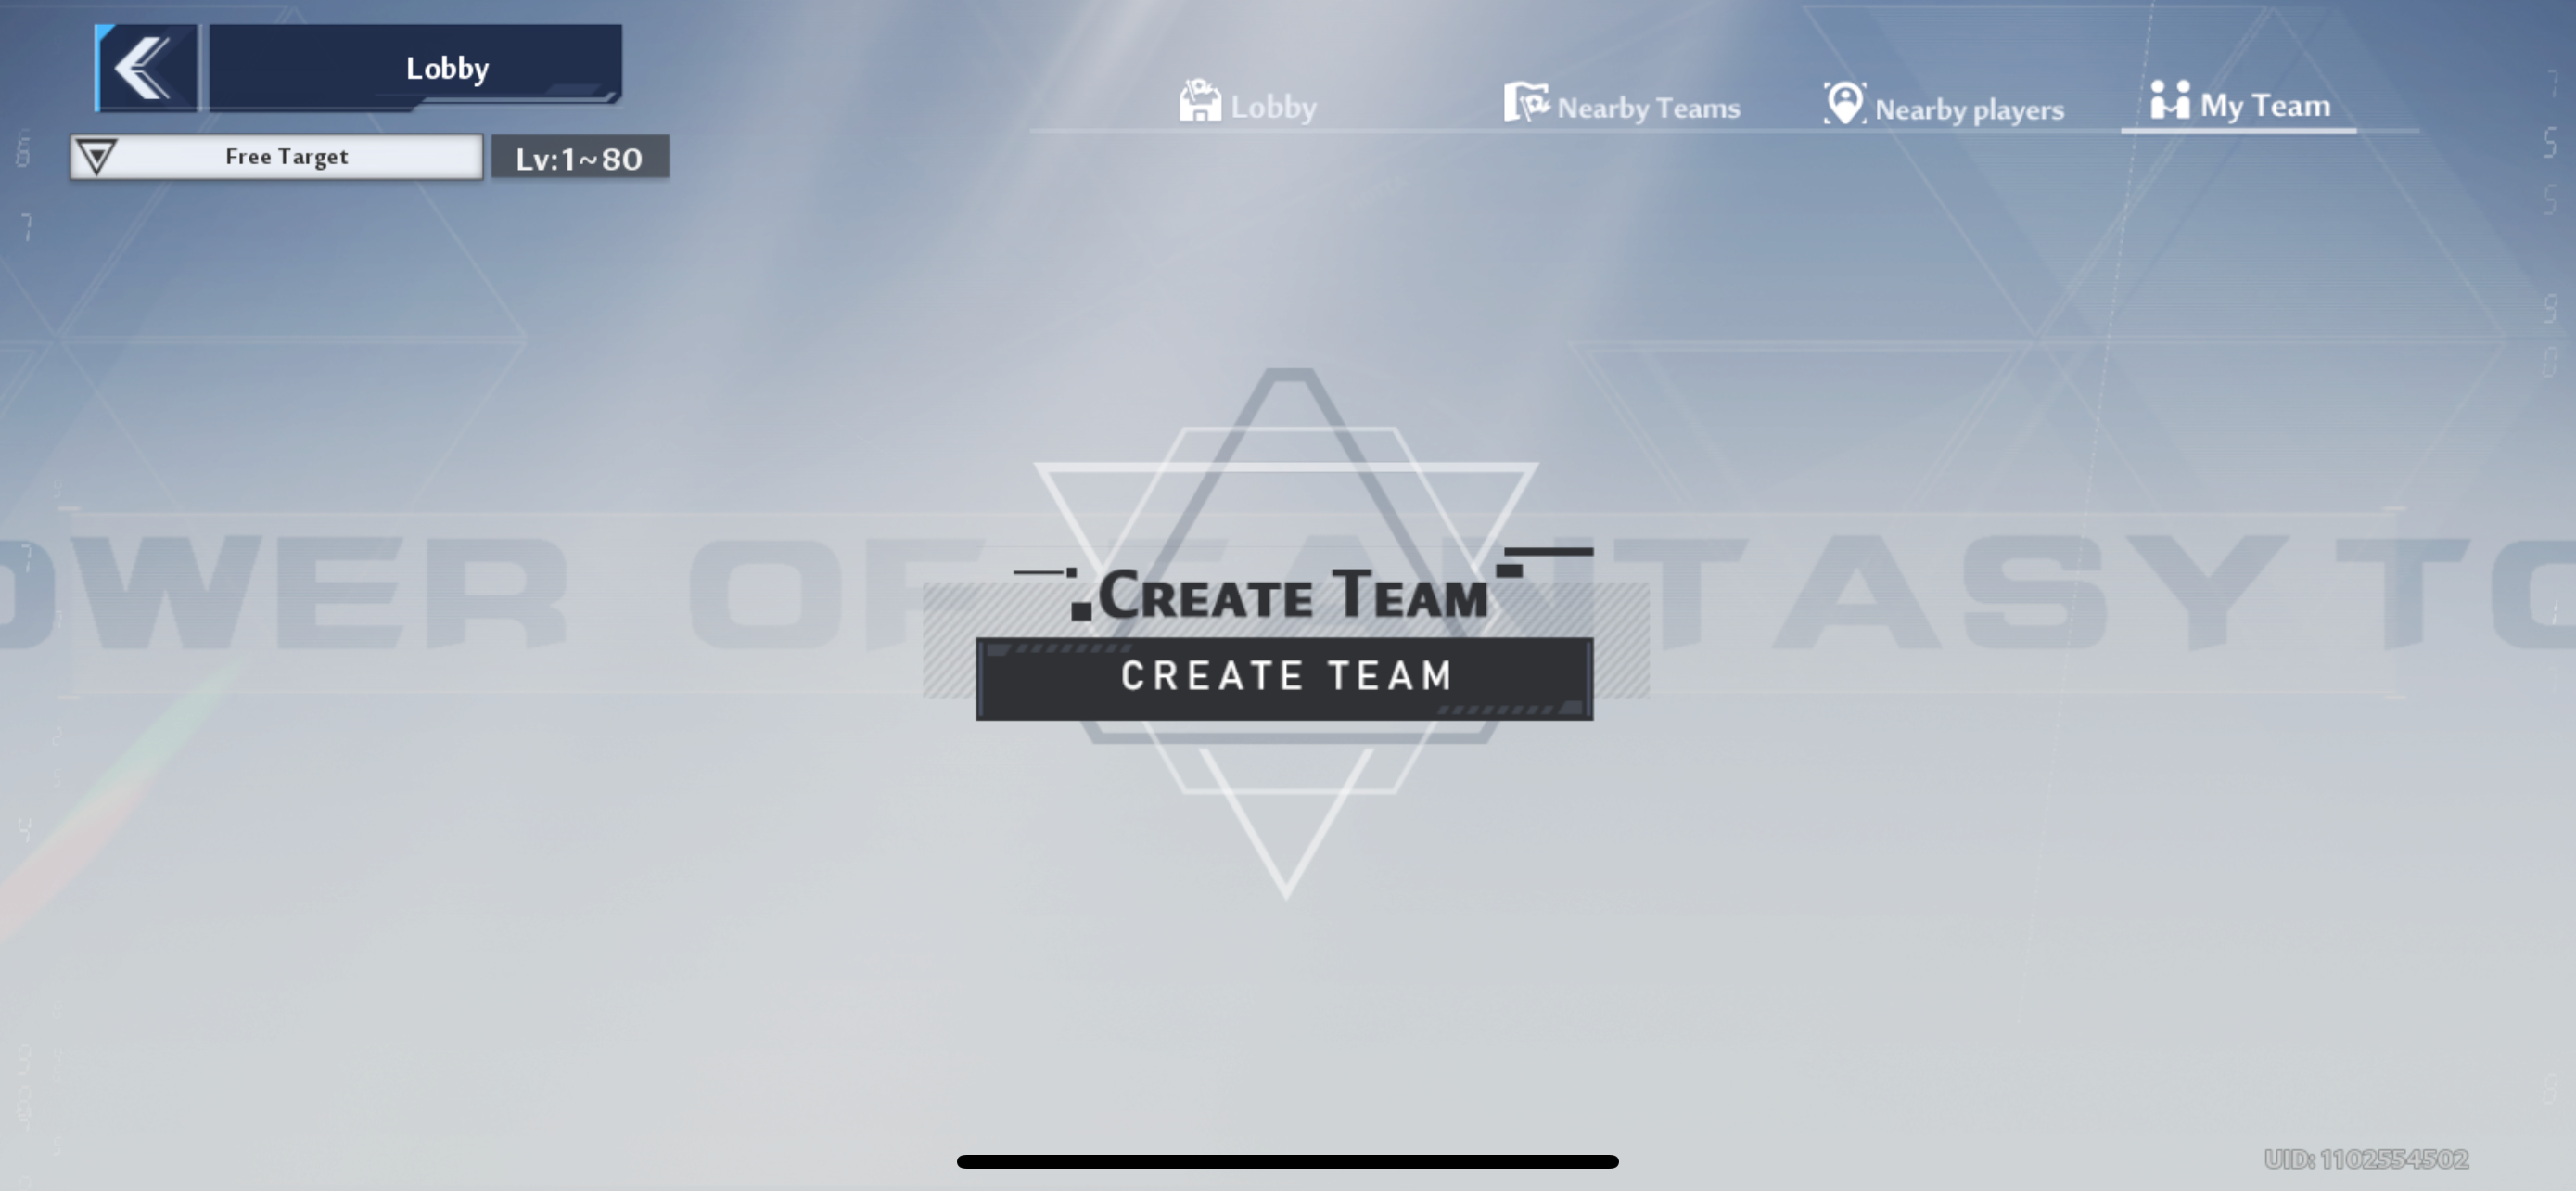 The team menu where players can create their own team in Tower of Fantasy.